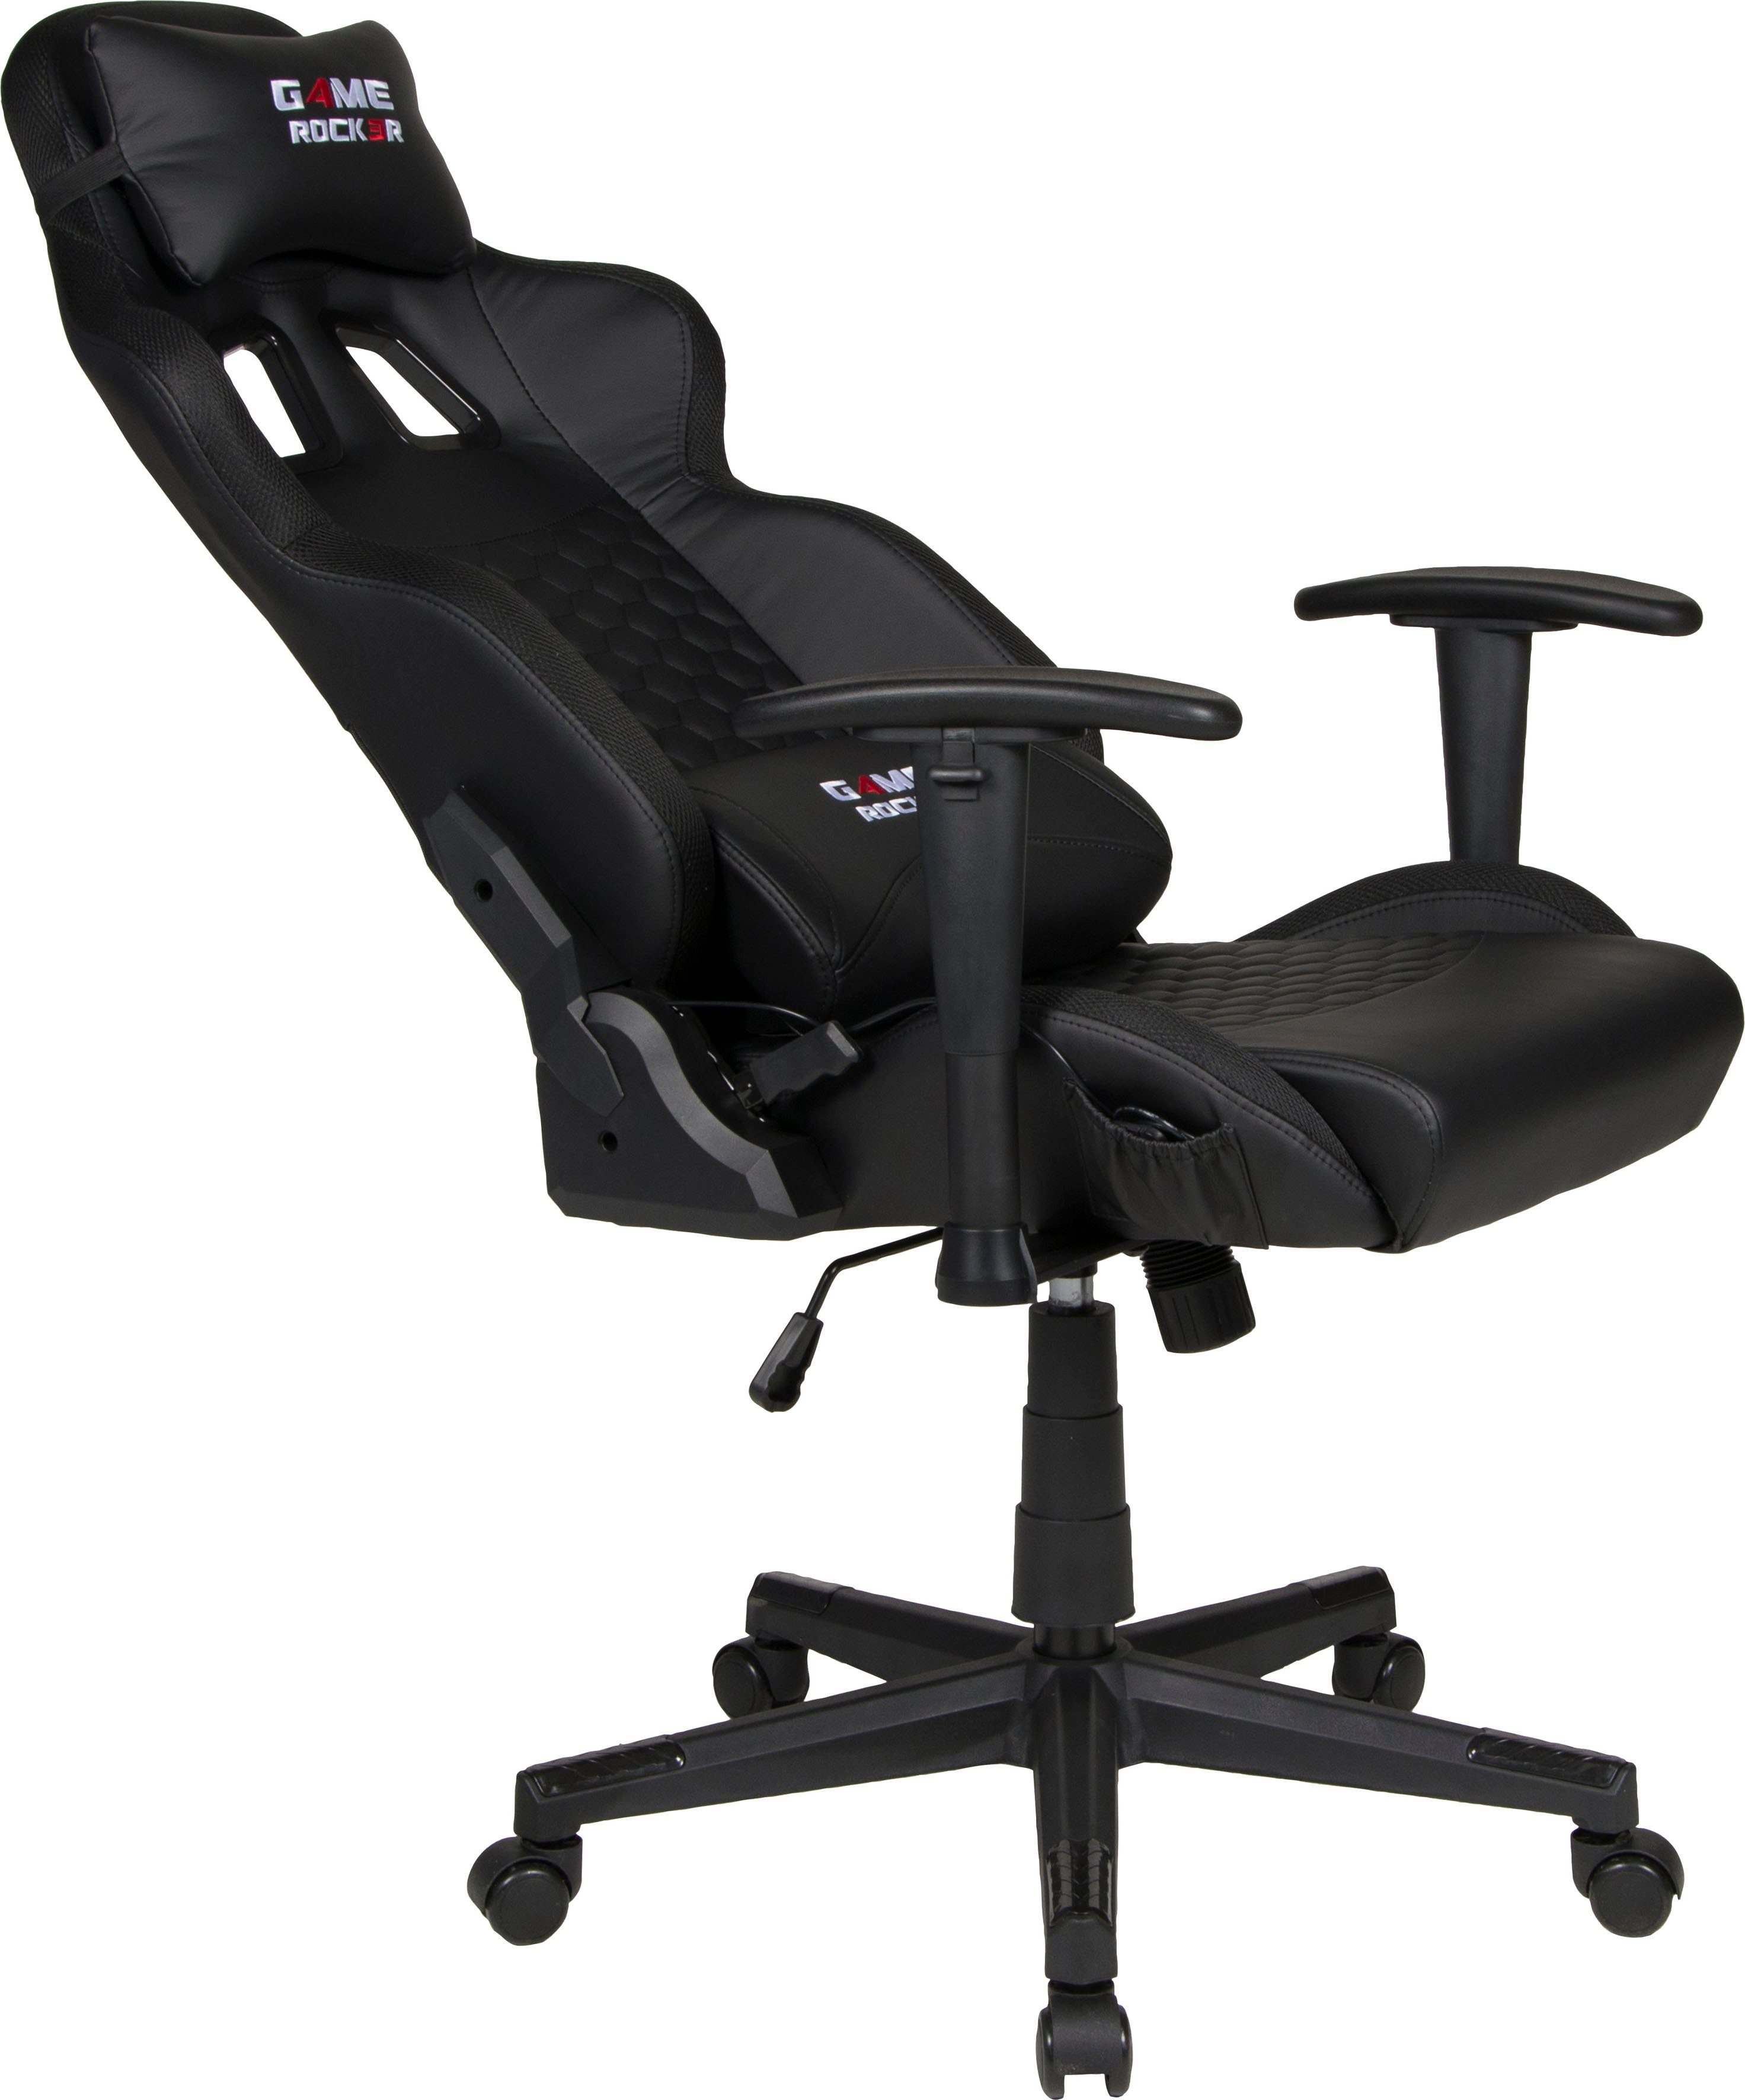 Duo Collection LED, Chefsessel Gaming Wechselbeleuchtung Game-Rocker Chair LED G-10 mit